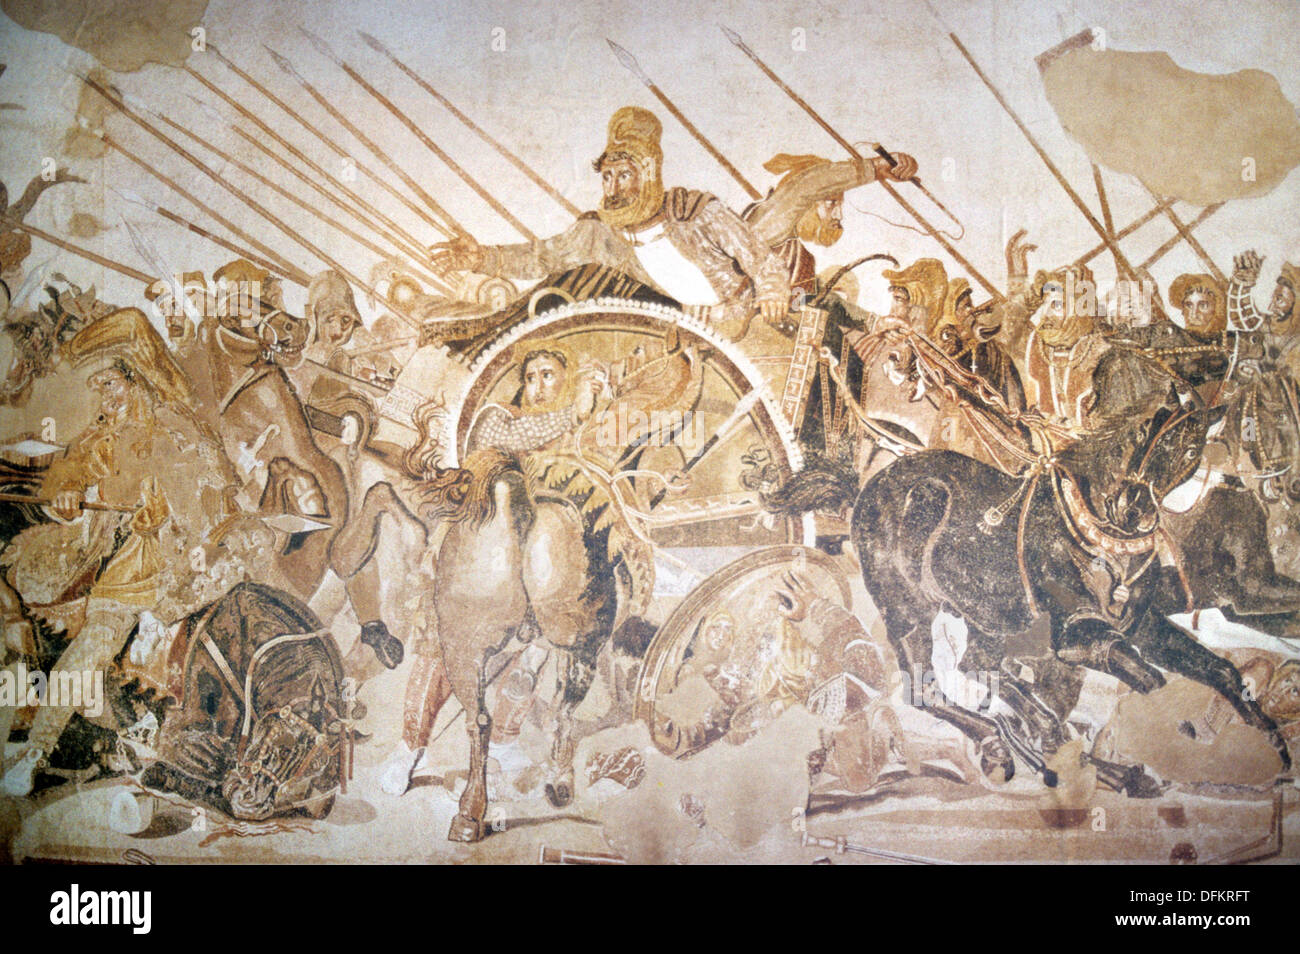 Roman Mosaic of Darius III of Persia (in Chariot) in First Battle of Issus (333BC) Against Alexander the Great of Macedonia Stock Photo